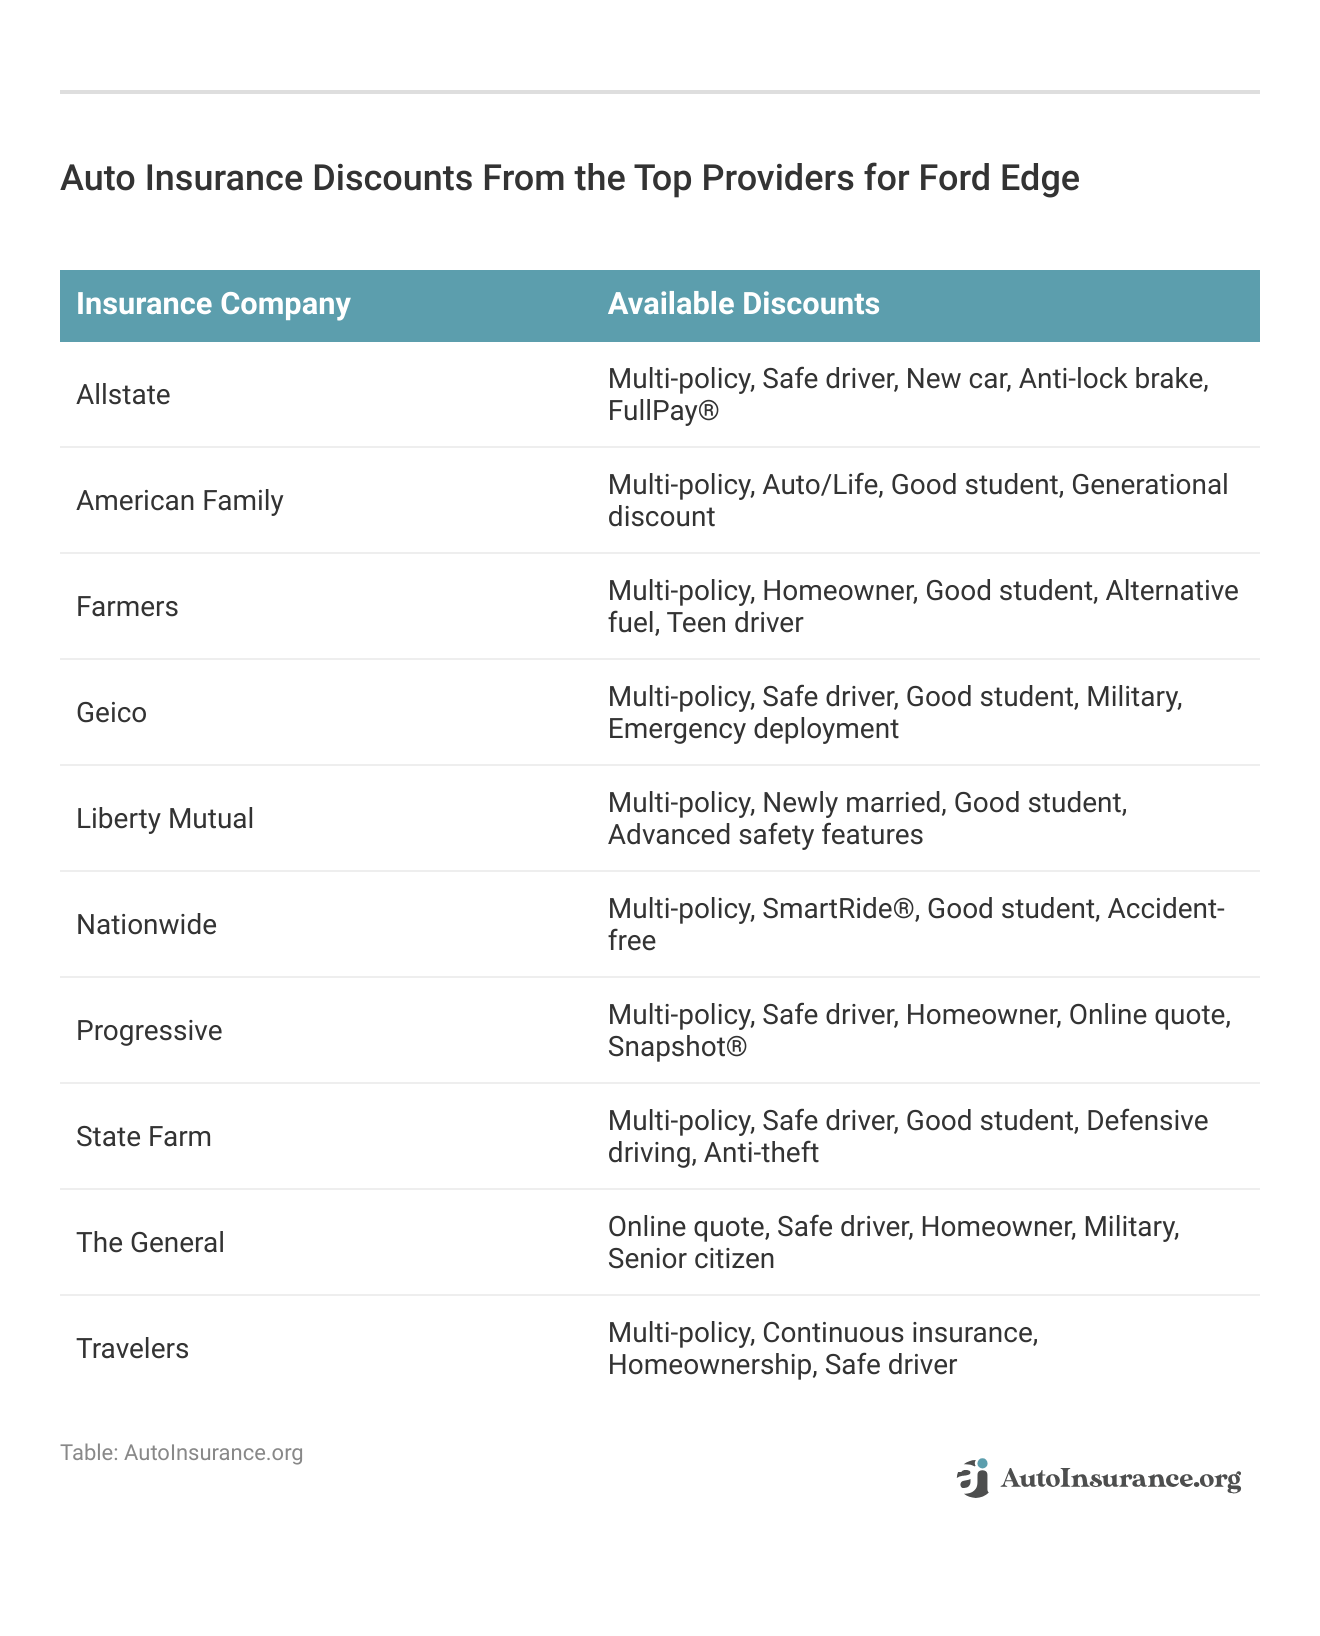 <h3>Auto Insurance Discounts From the Top Providers for Ford Edge</h3>